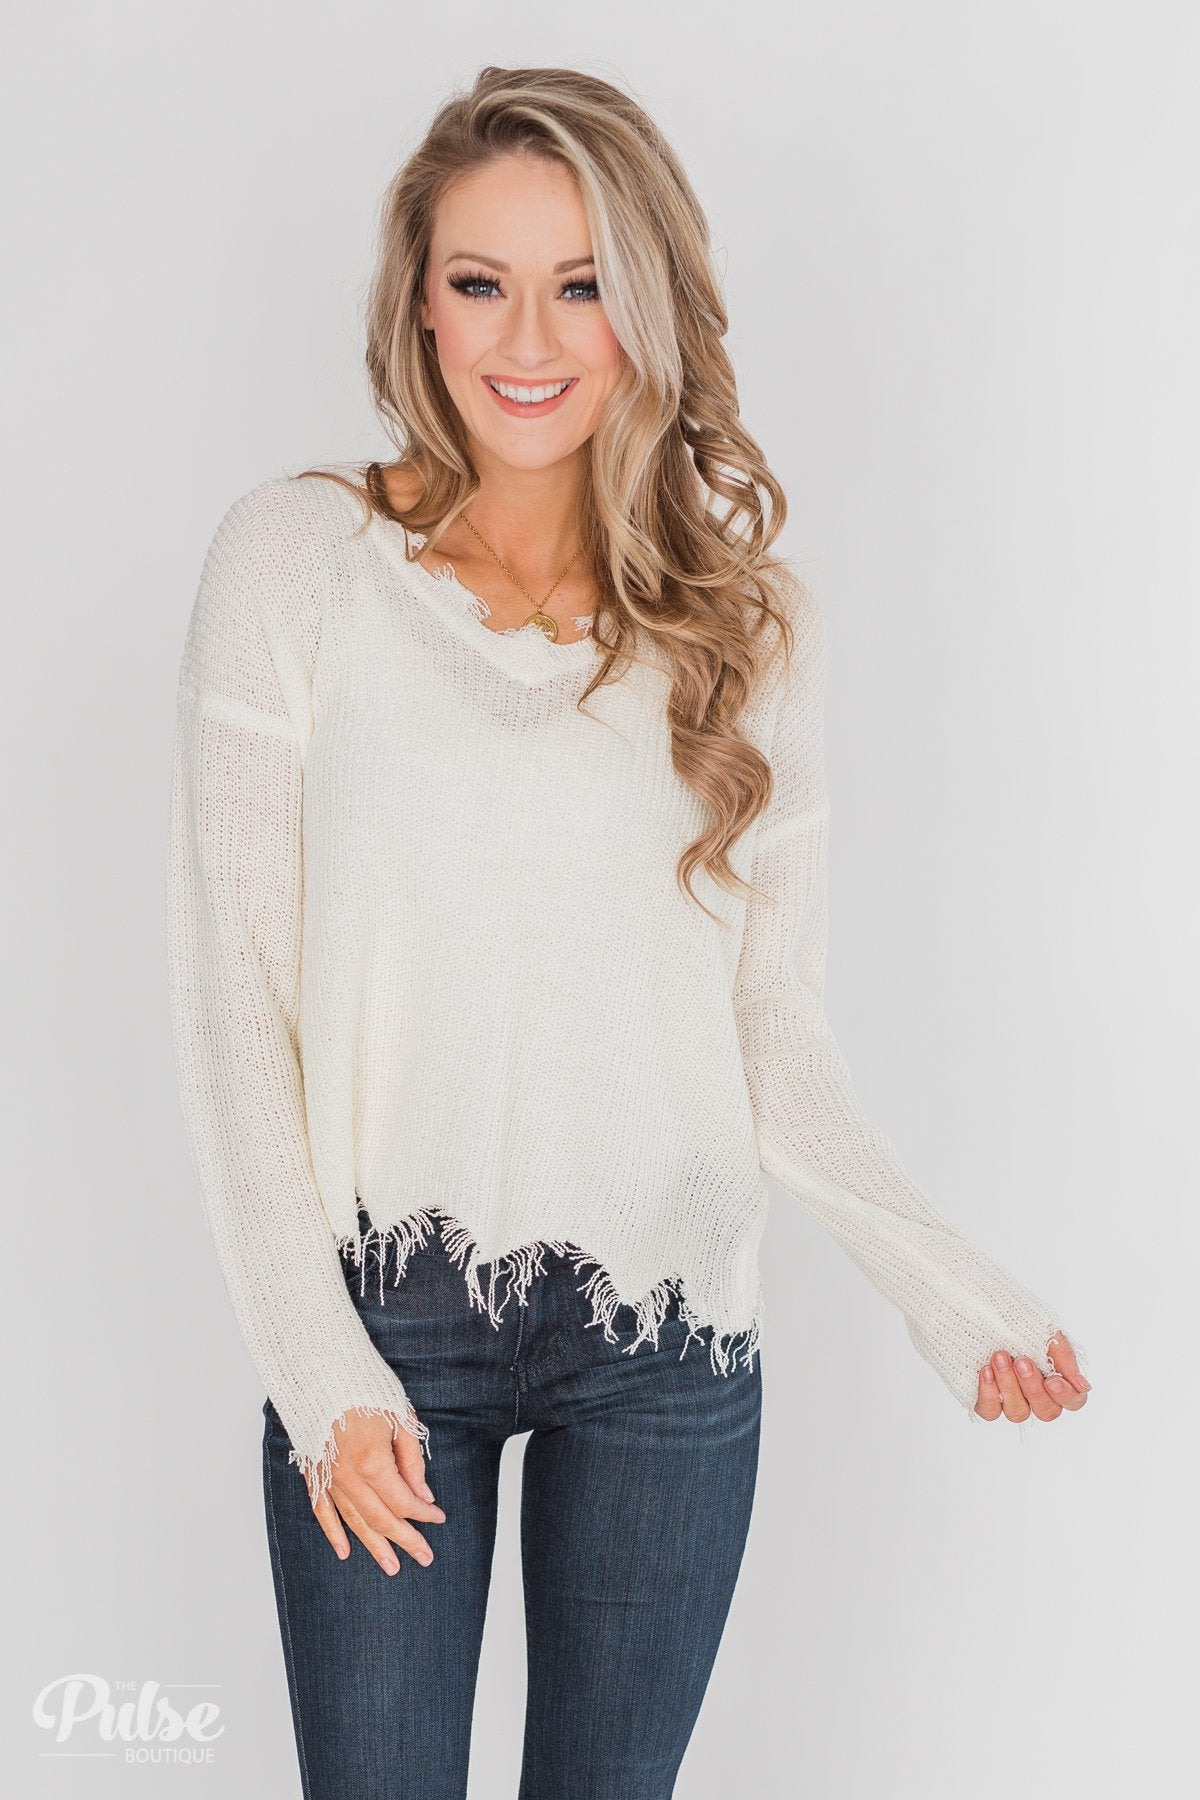 frayed sweater boutique